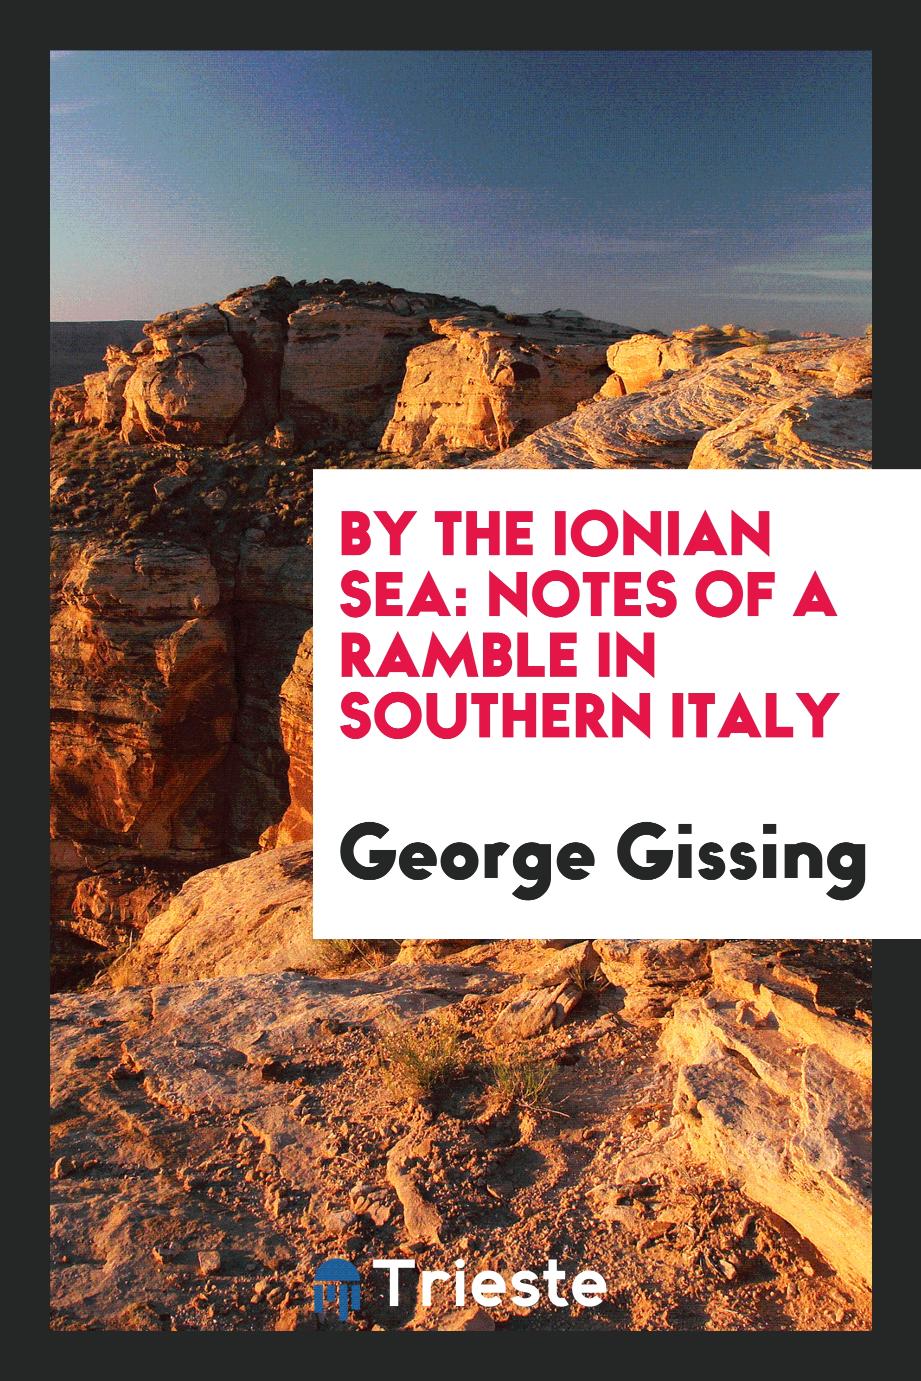 By the Ionian Sea: notes of a ramble in southern Italy